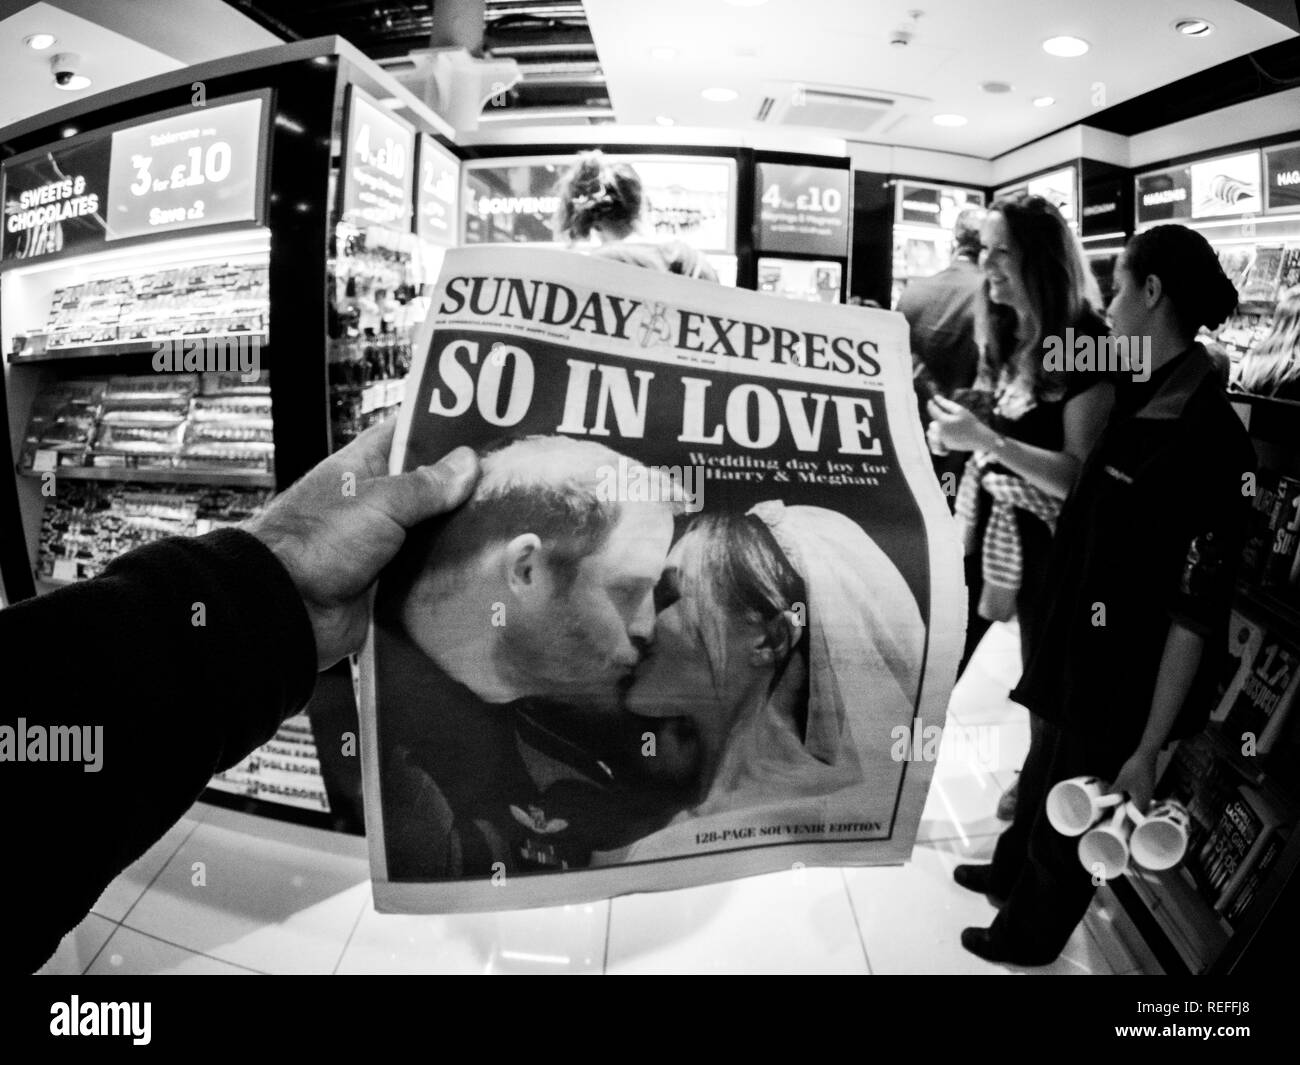 LONDON, ENGLAND - MAY 20, 2018: POV Sunday Express front cover newspaper in British press kiosk featuring portraits of Prince Harry and Meghan Markle following the Royal Wedding So in love  Stock Photo